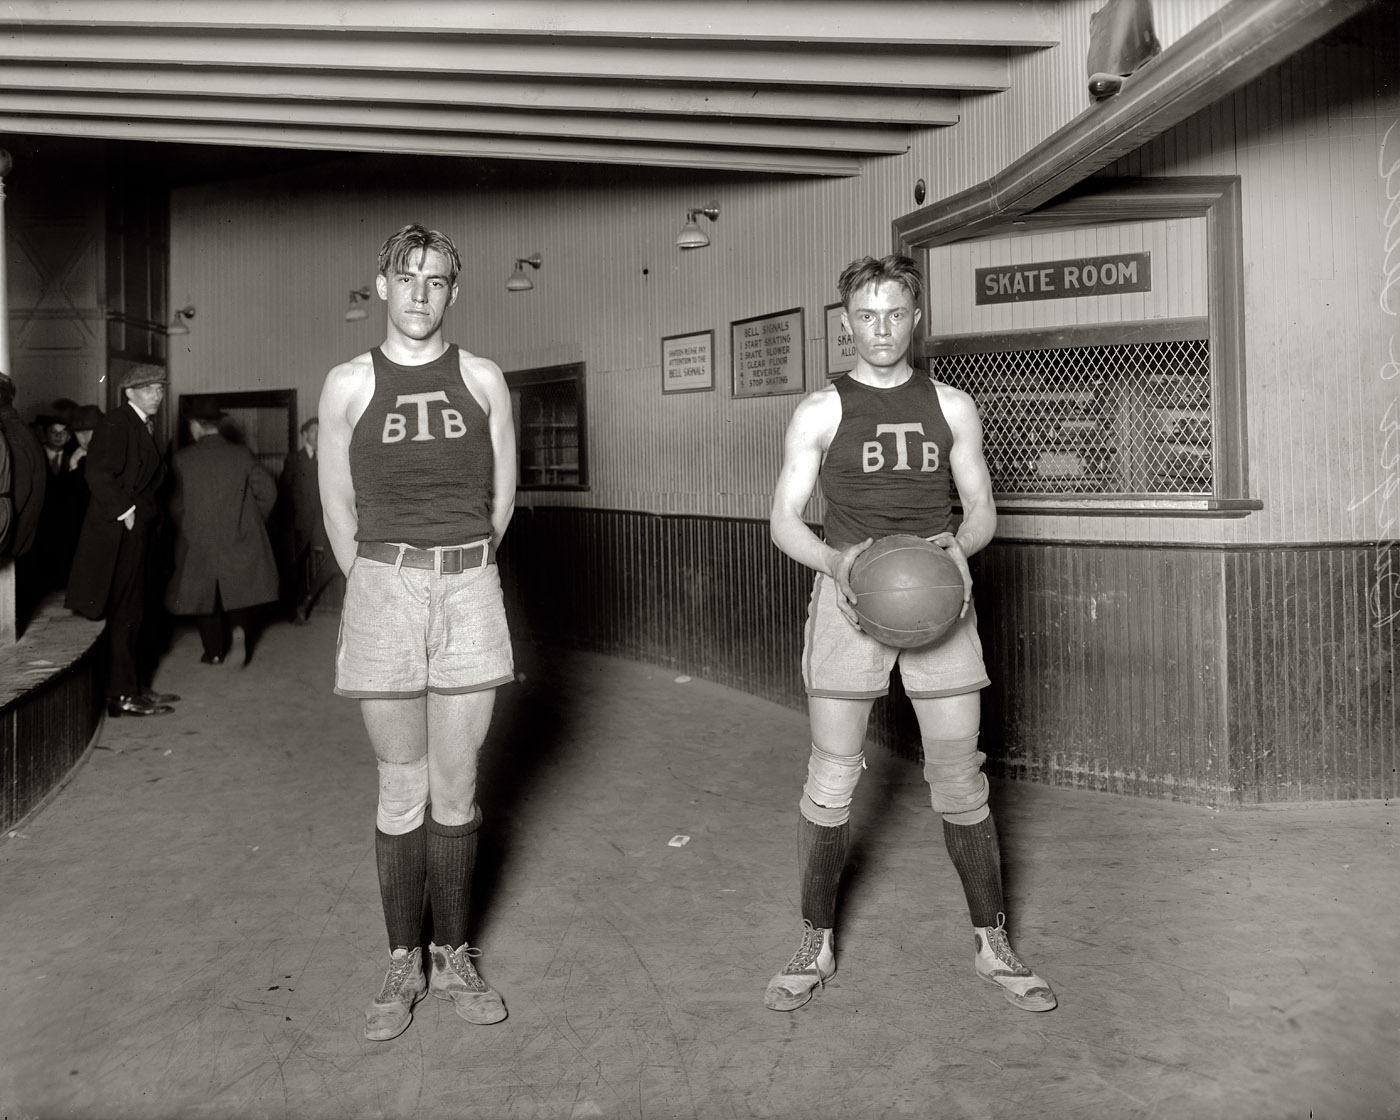 Washington, D.C., 1920. "Tech basket-ball. Burger and Gude." View full size. National Photo Company Collection glass negative.